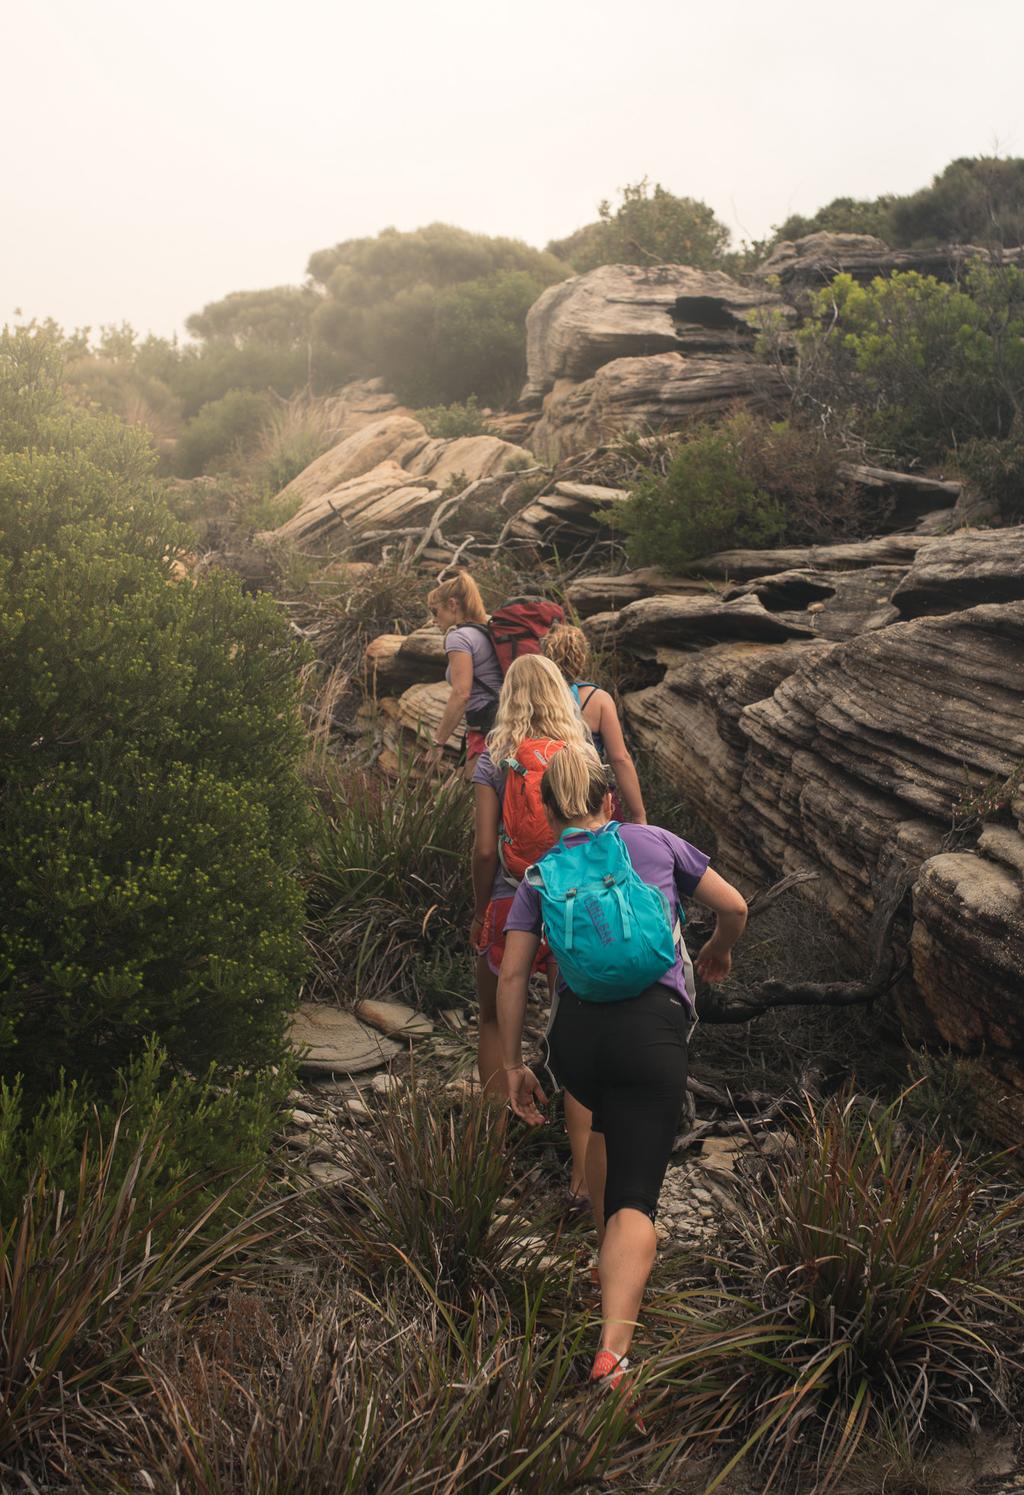 TREK TRAINING Trek Training is a time-efficient, outdoor adventure workout, using endurance walking and high intensity interval training on rough bush tracks, stairs, hills and soft sand, with